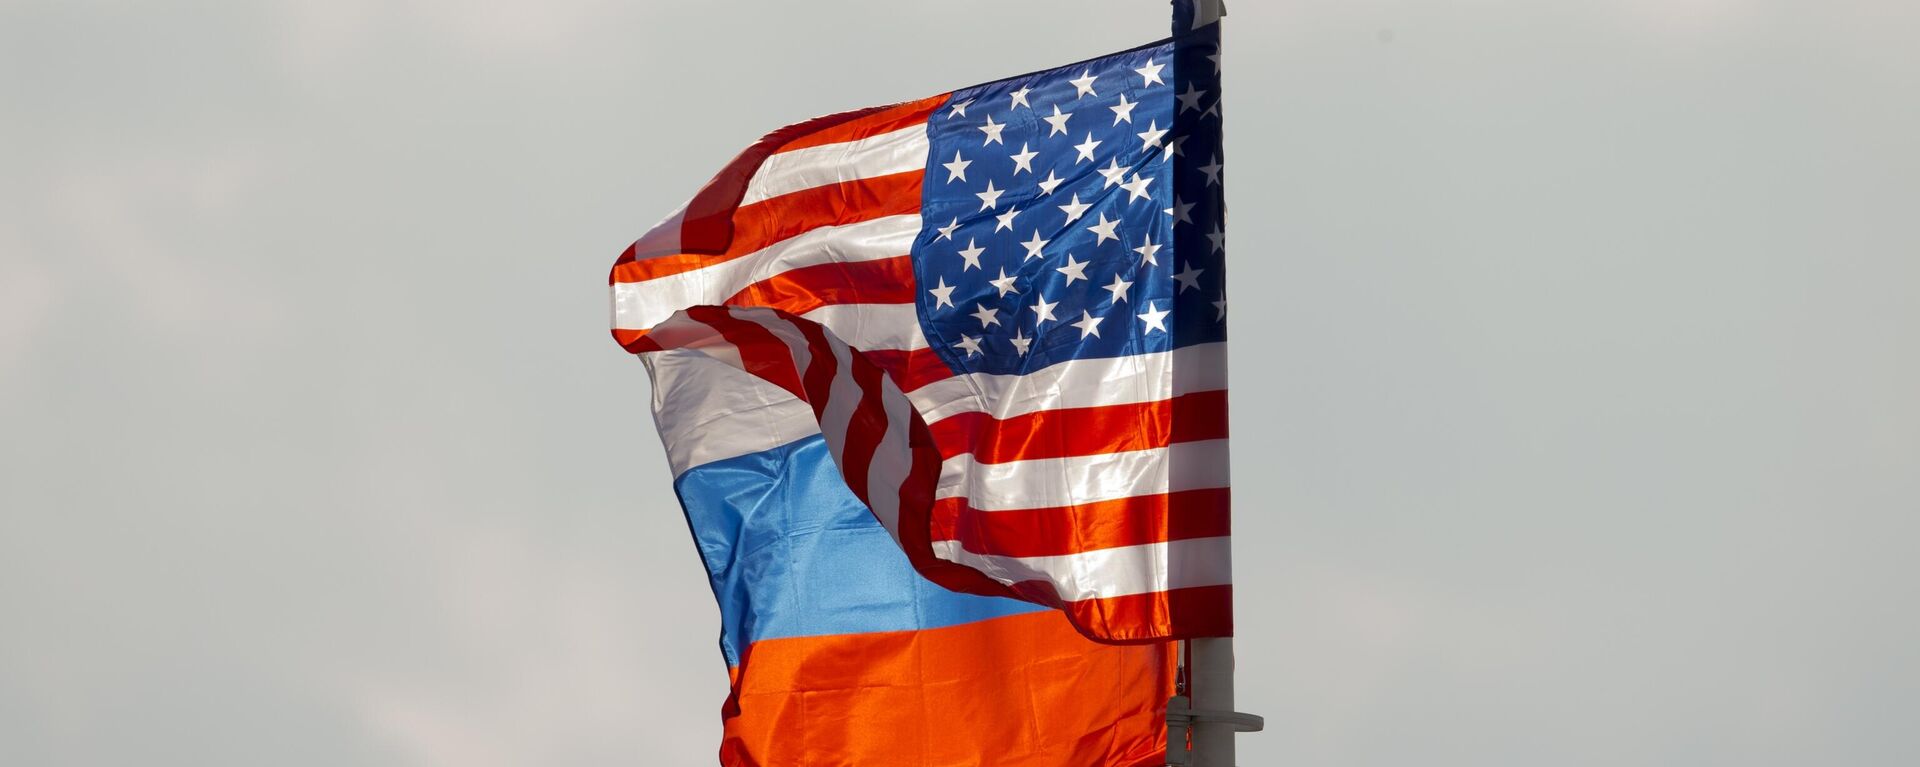 U.S. and Russian national flags wave on the wind before US Secretary of State Rex Tillerson arrival in Moscow's Vnukovo airport, Russia, Tuesday, April 11, 2017 - Sputnik International, 1920, 04.03.2024